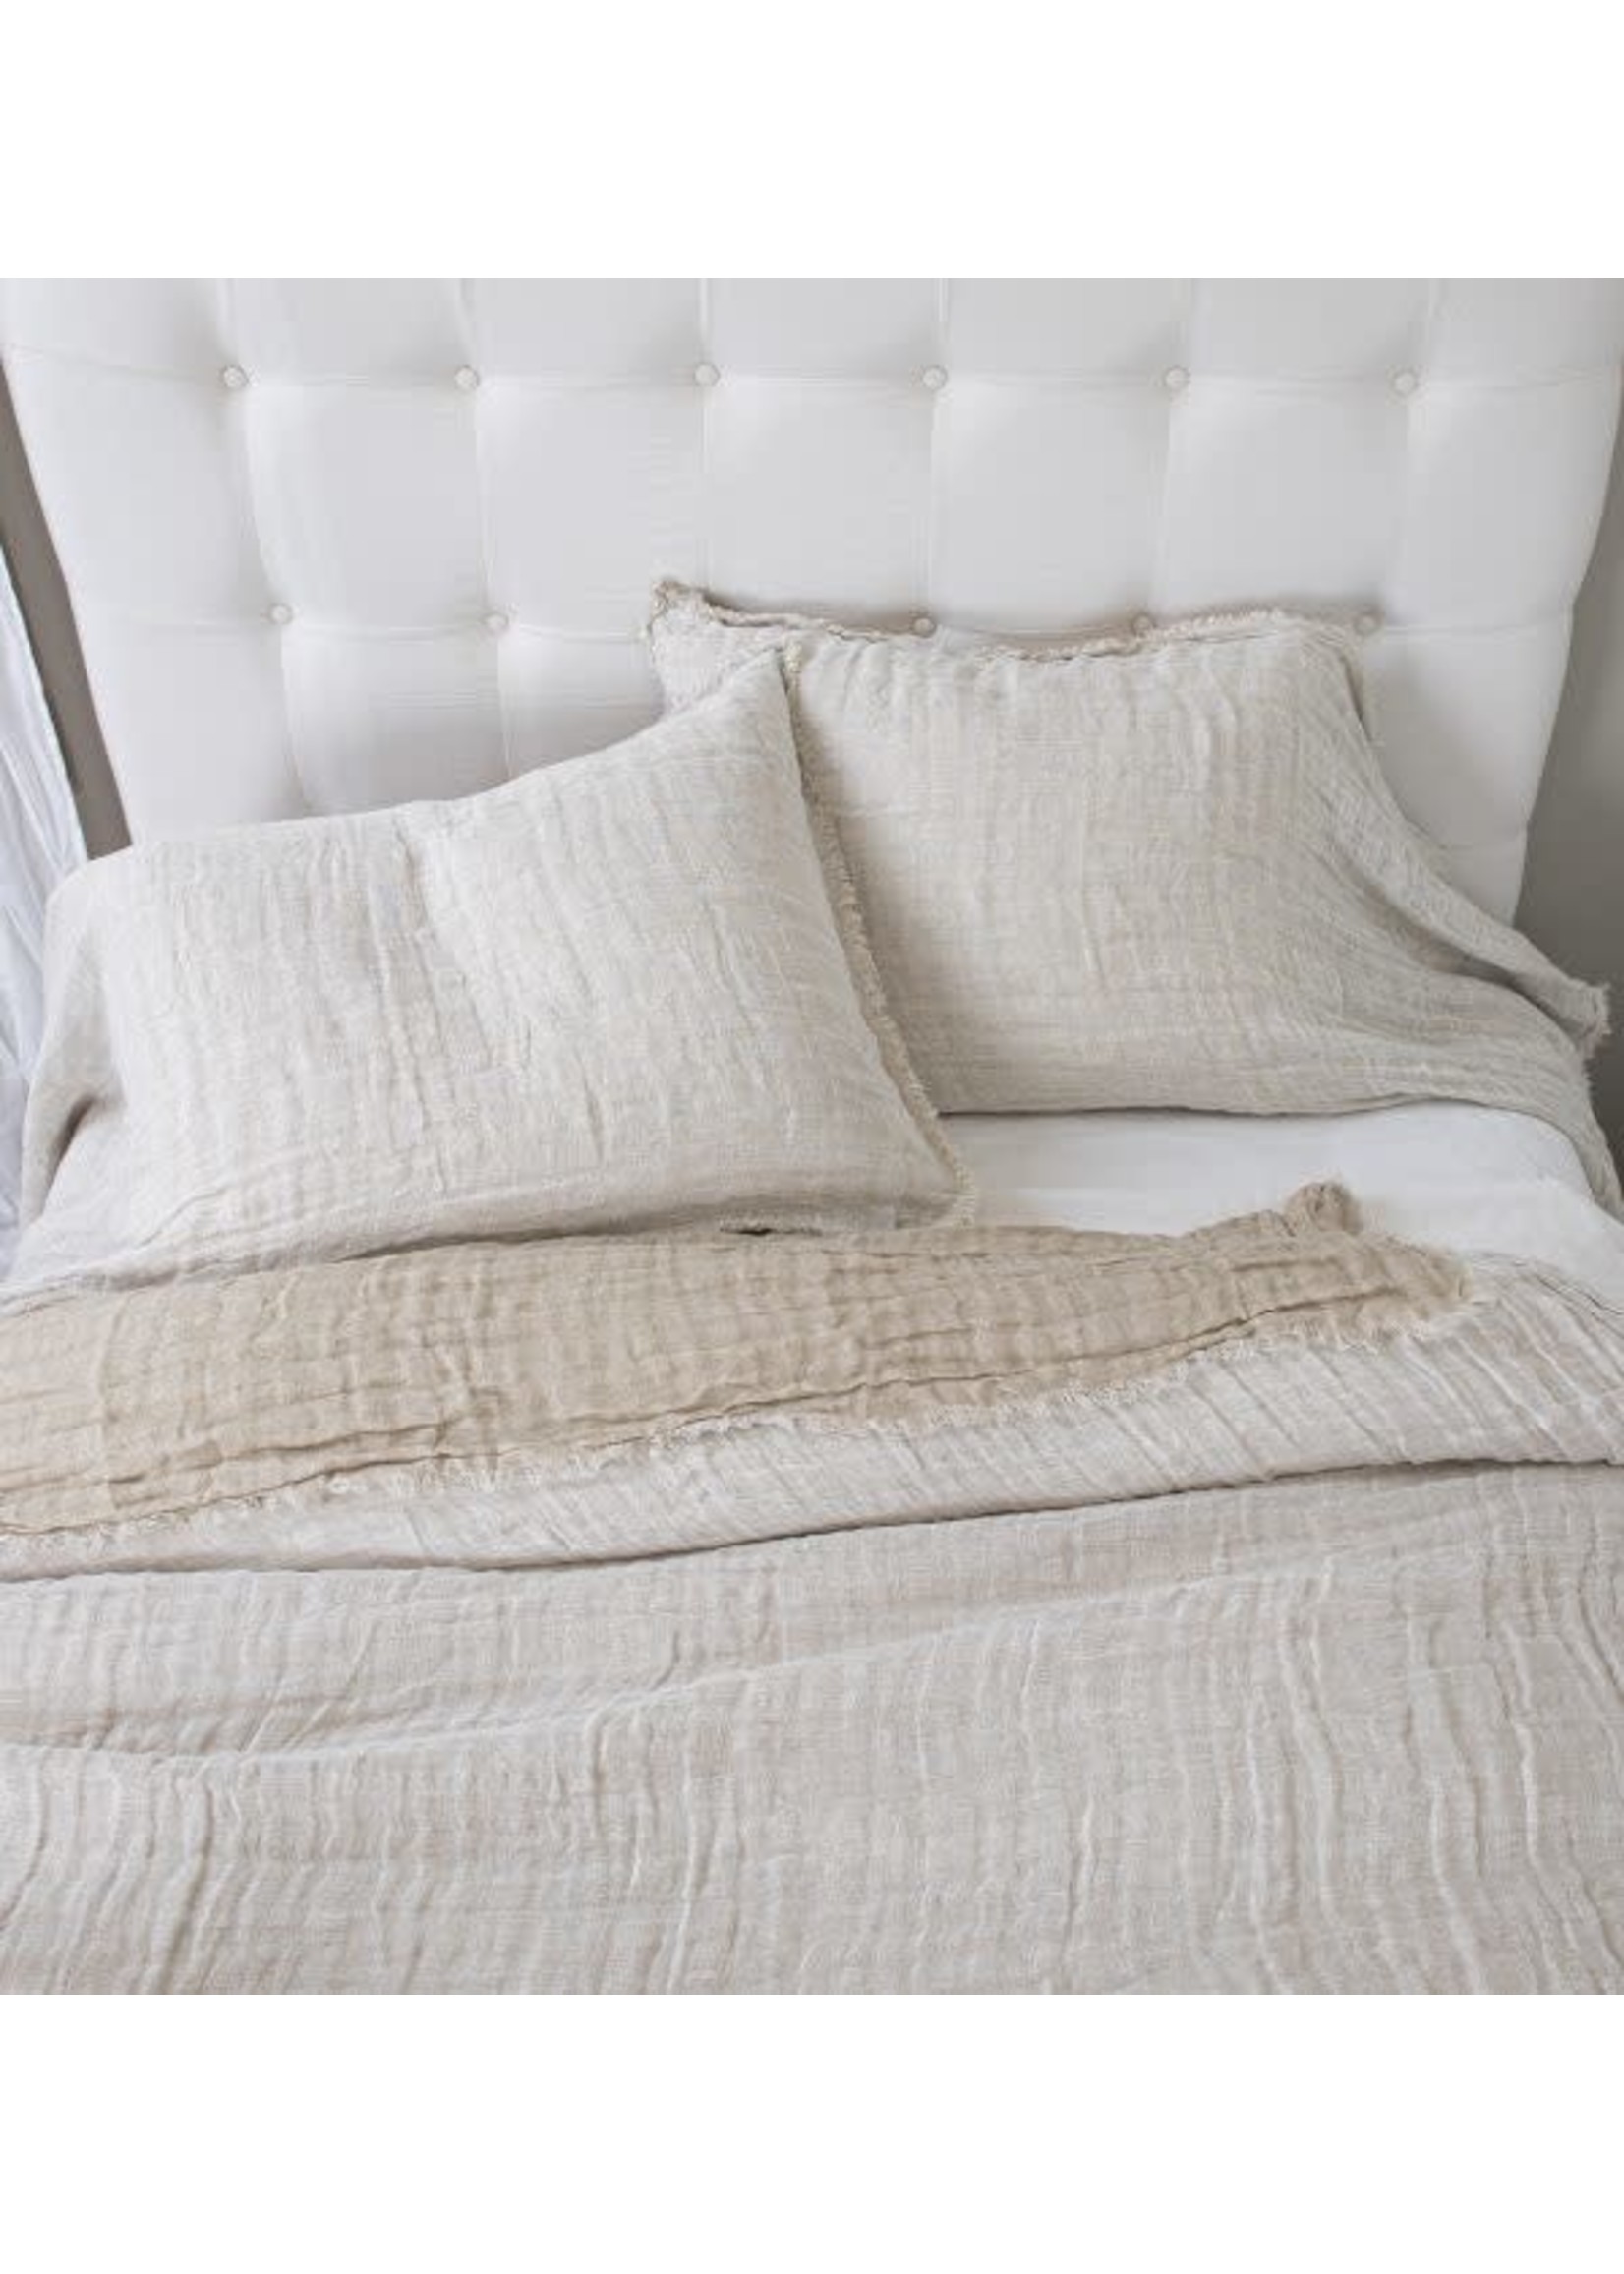 Amity Home Amity Home Kent Linen Bedspread White Natural Queen